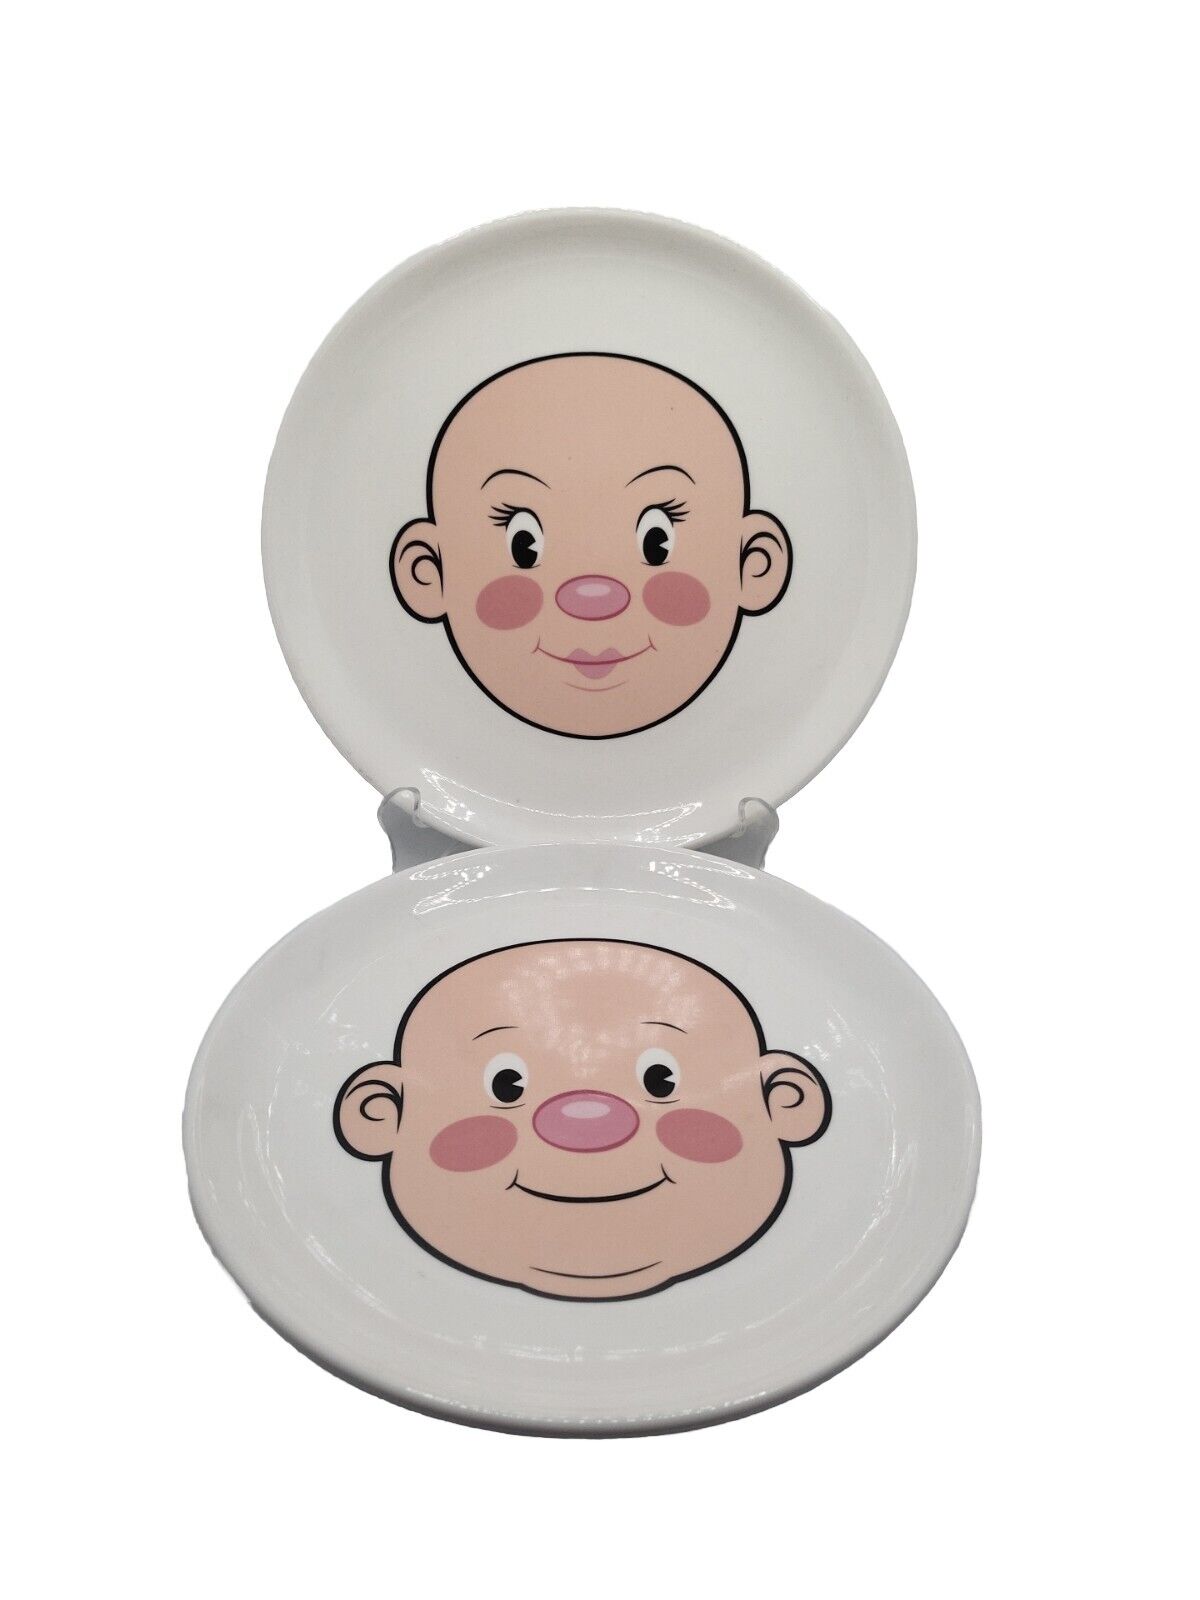 Fred Plays with His Food Plate Funny Face Design 8 1/2 Dinner Plates Set 2